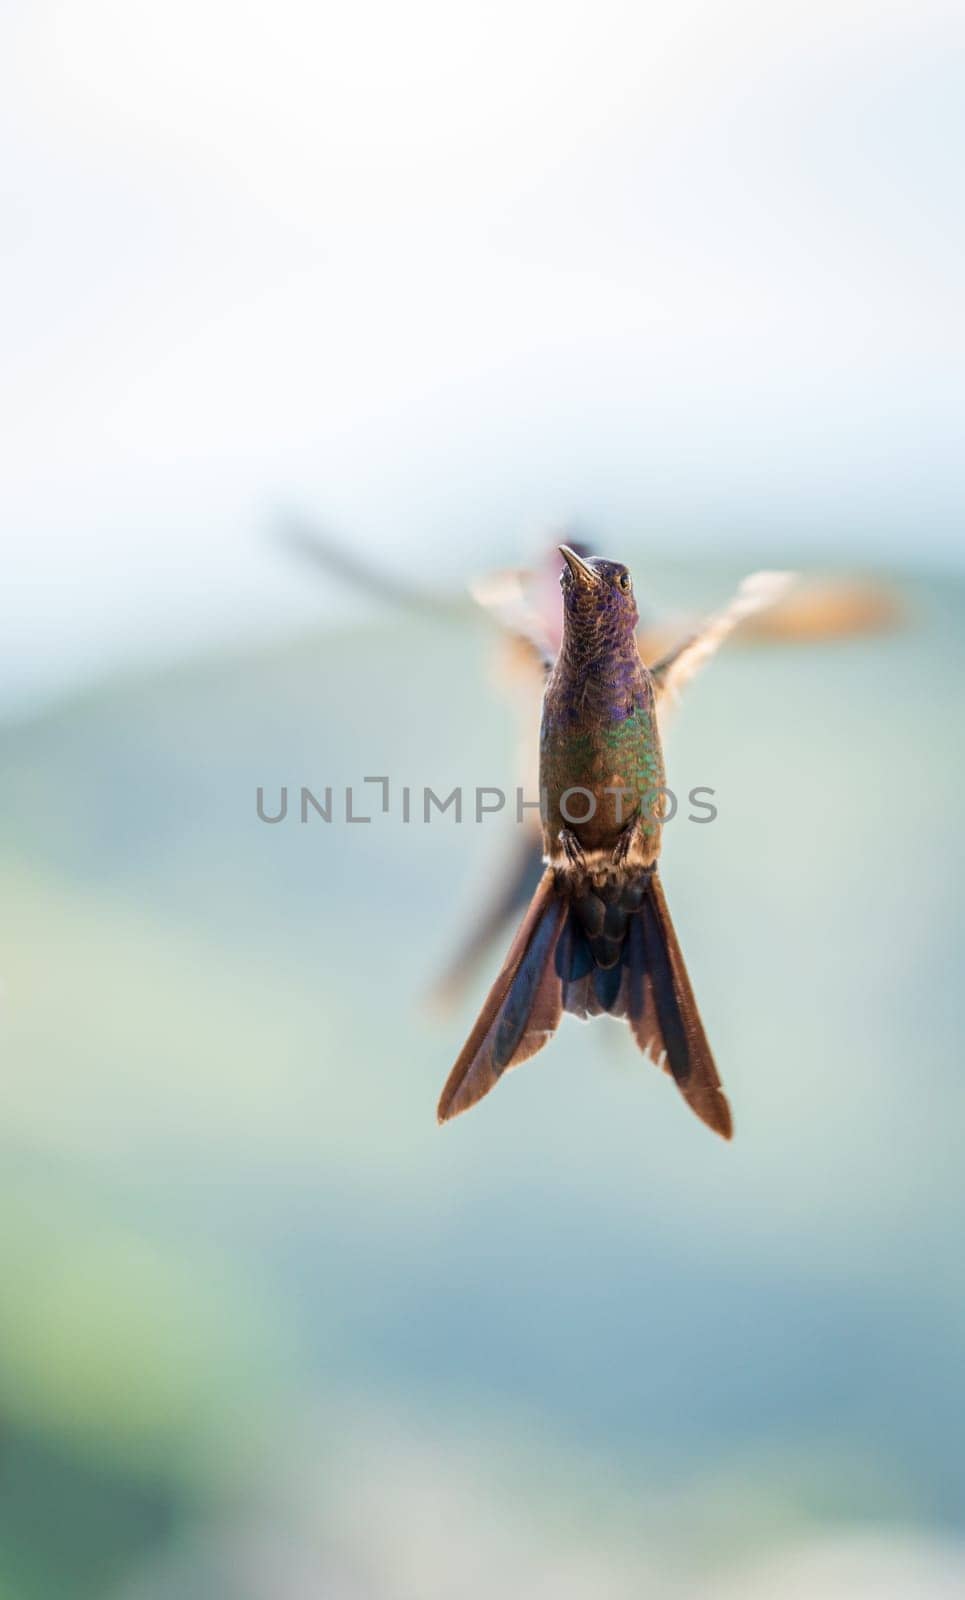 Stunning Hummingbird in Flight with Vibrant Colored Feathers by FerradalFCG